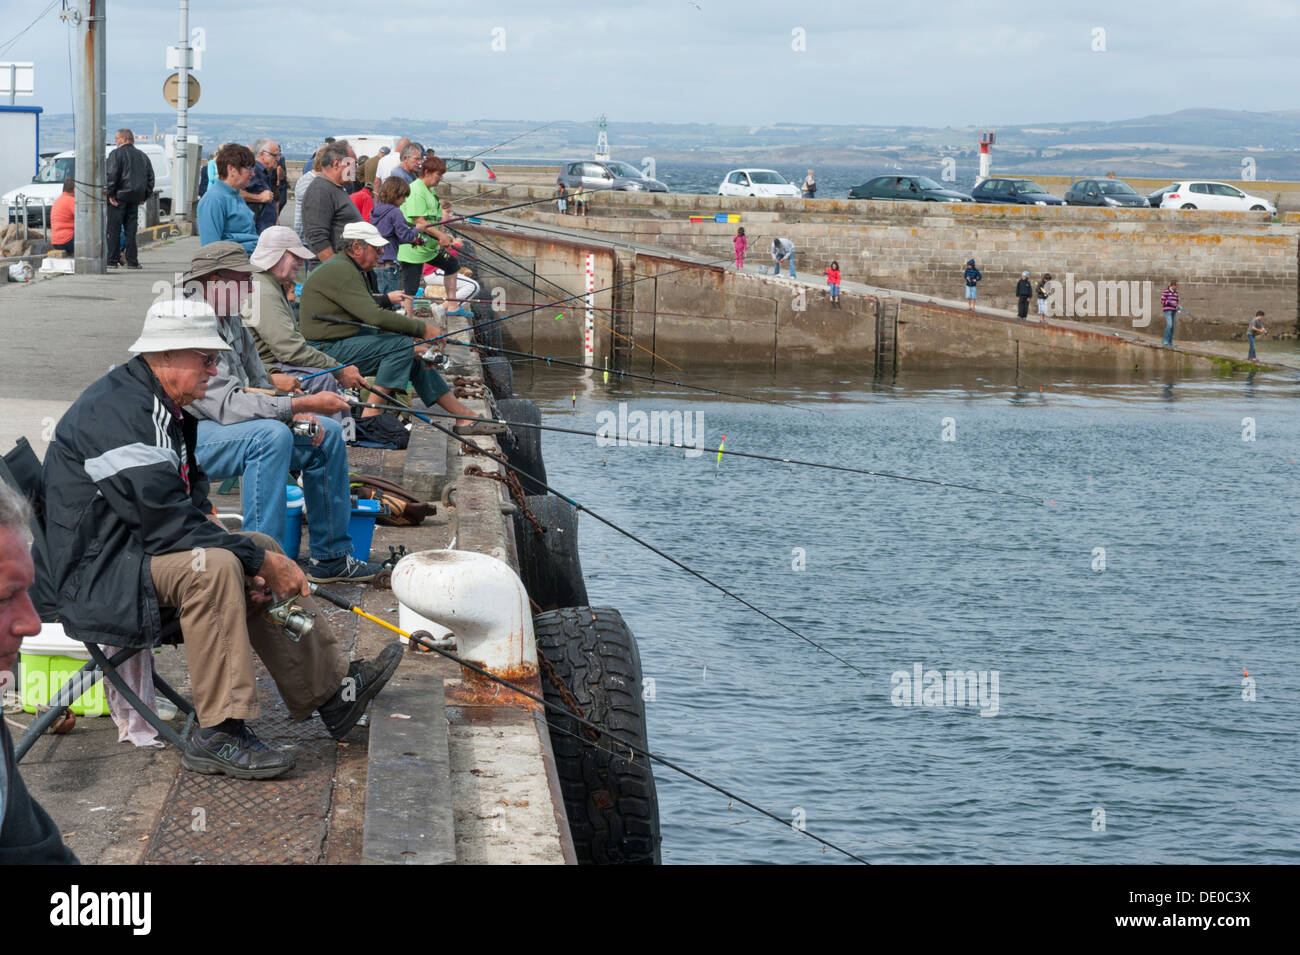 https://c8.alamy.com/comp/DE0C3X/lots-of-people-fishing-with-rod-and-line-at-the-harbour-wall-at-douarnenez-DE0C3X.jpg